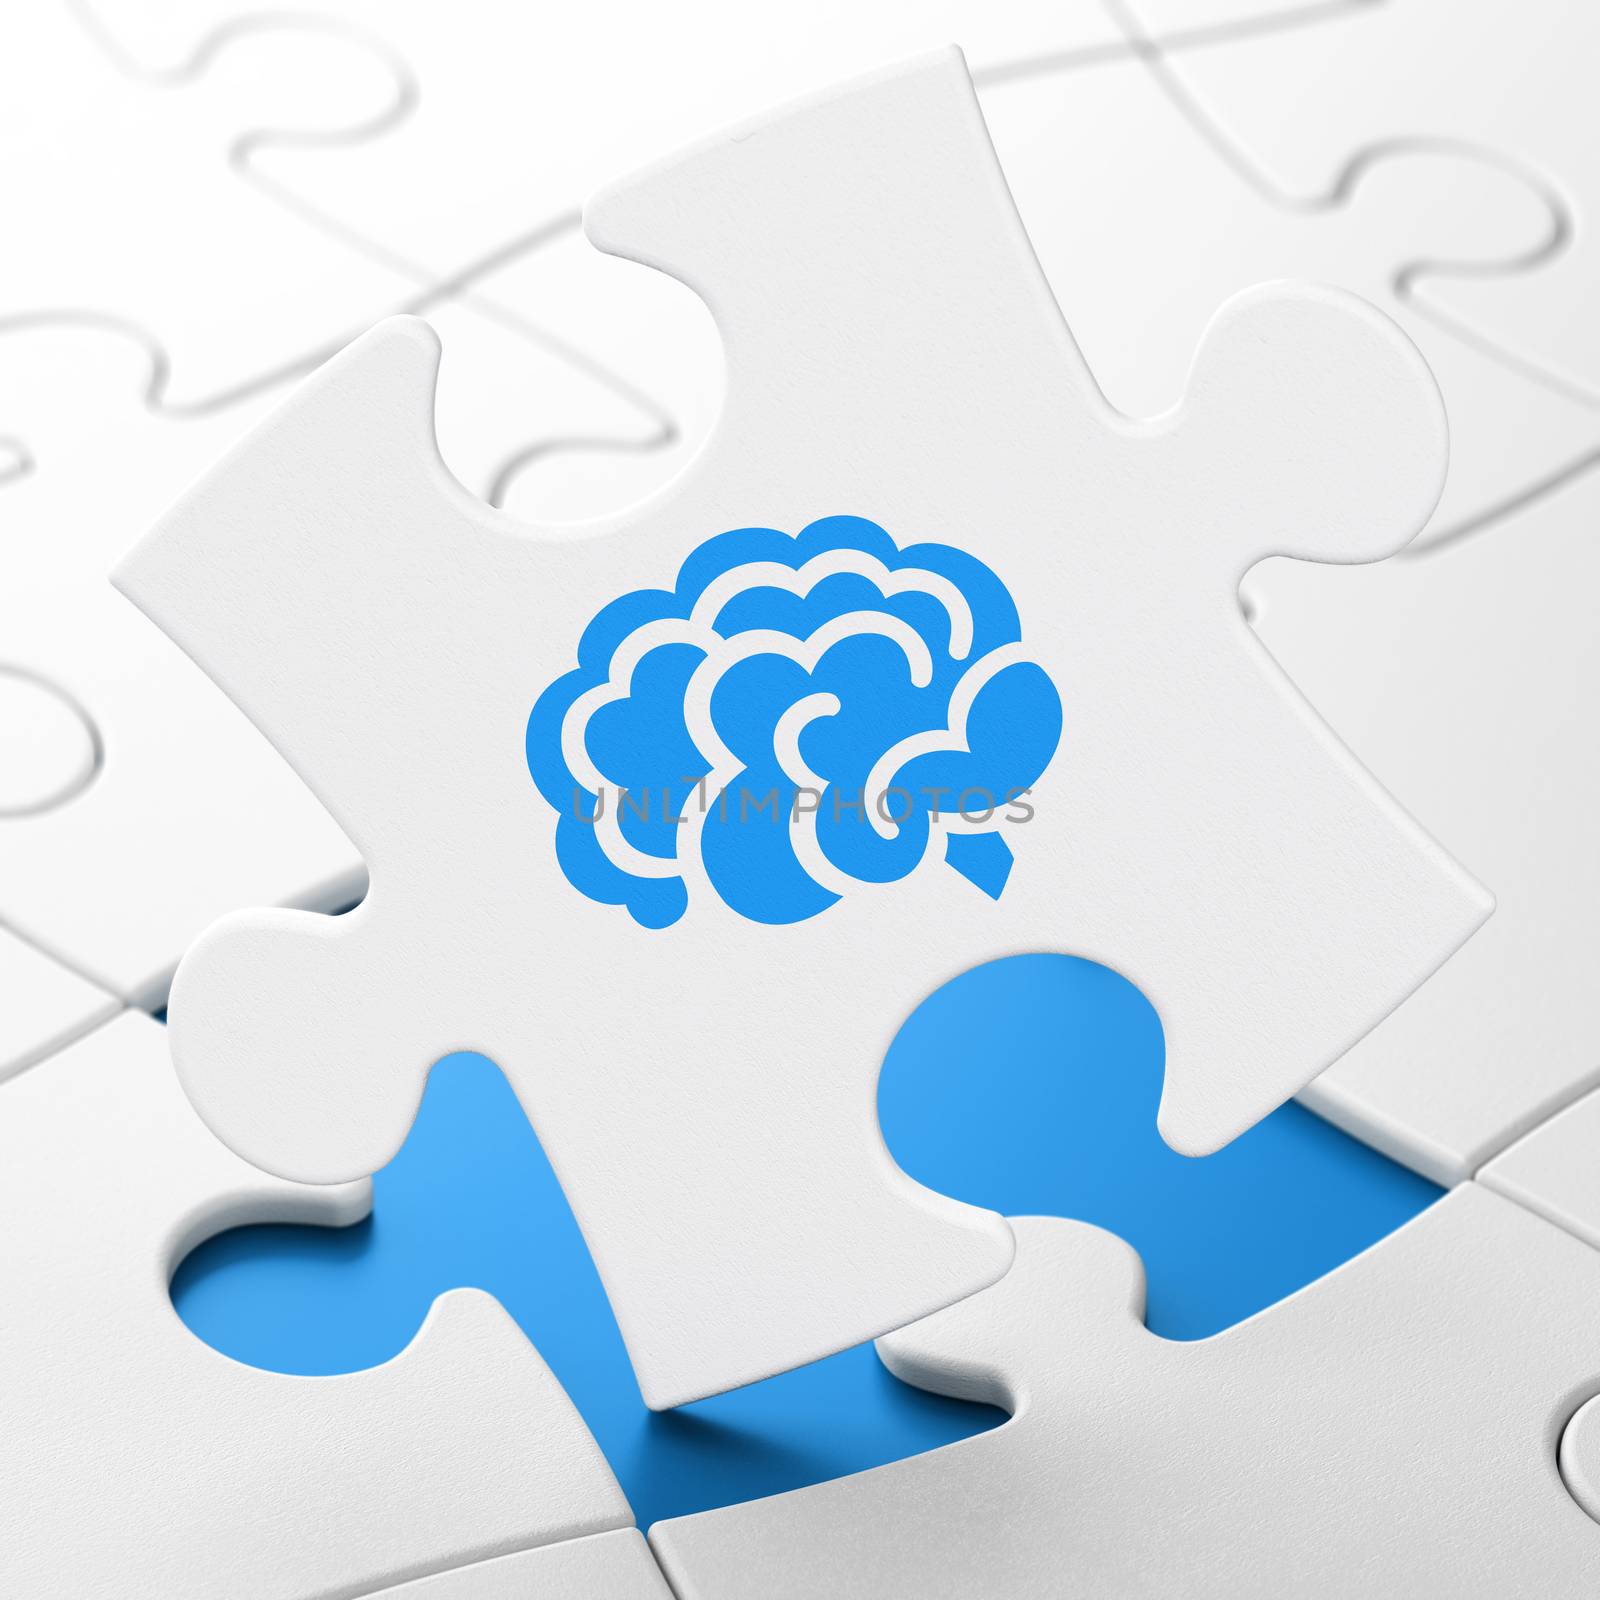 Science concept: Brain on White puzzle pieces background, 3D rendering